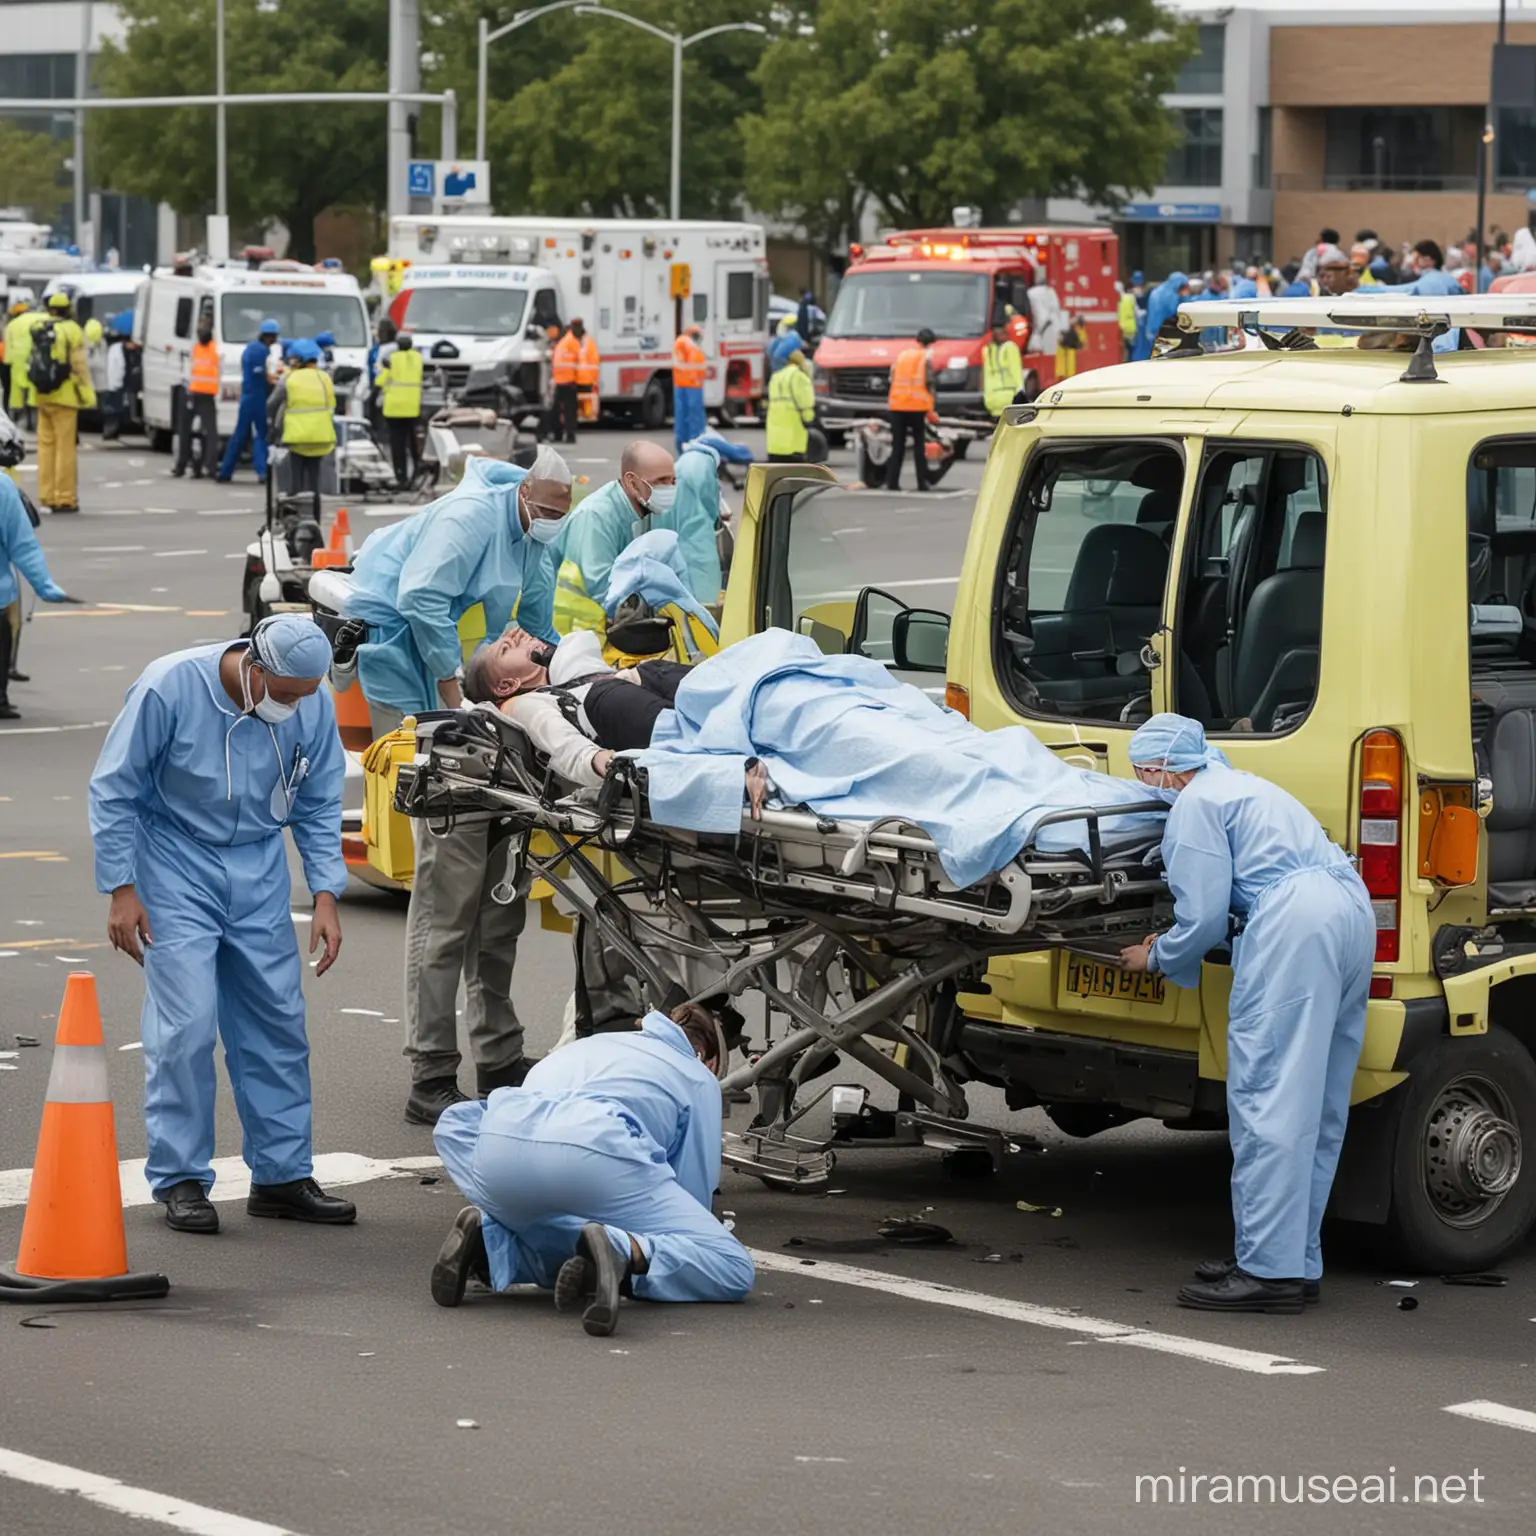  a hospital scene depicting medical personnel treating a crash victim, highlighting the human cost of road traffic accident